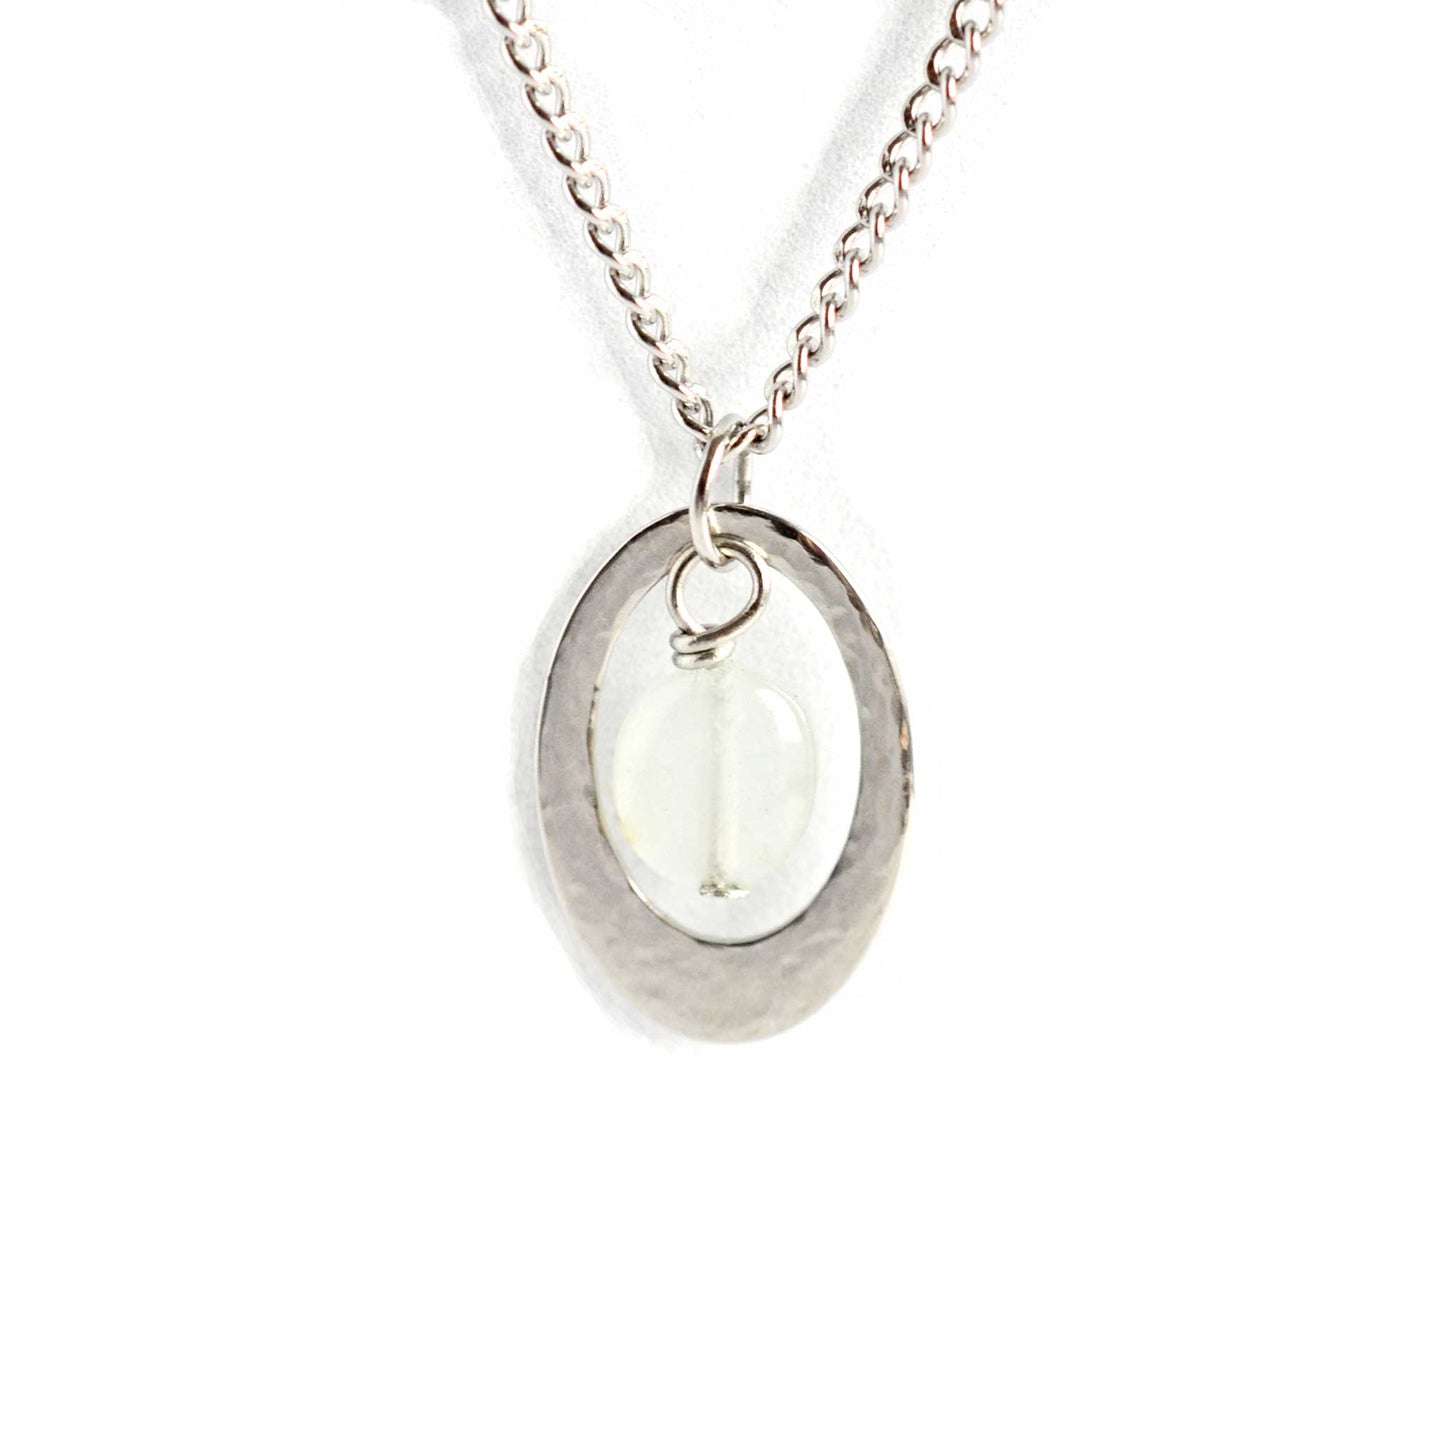 Oval stainless steel necklace with Aquamarine birthstone on white background.